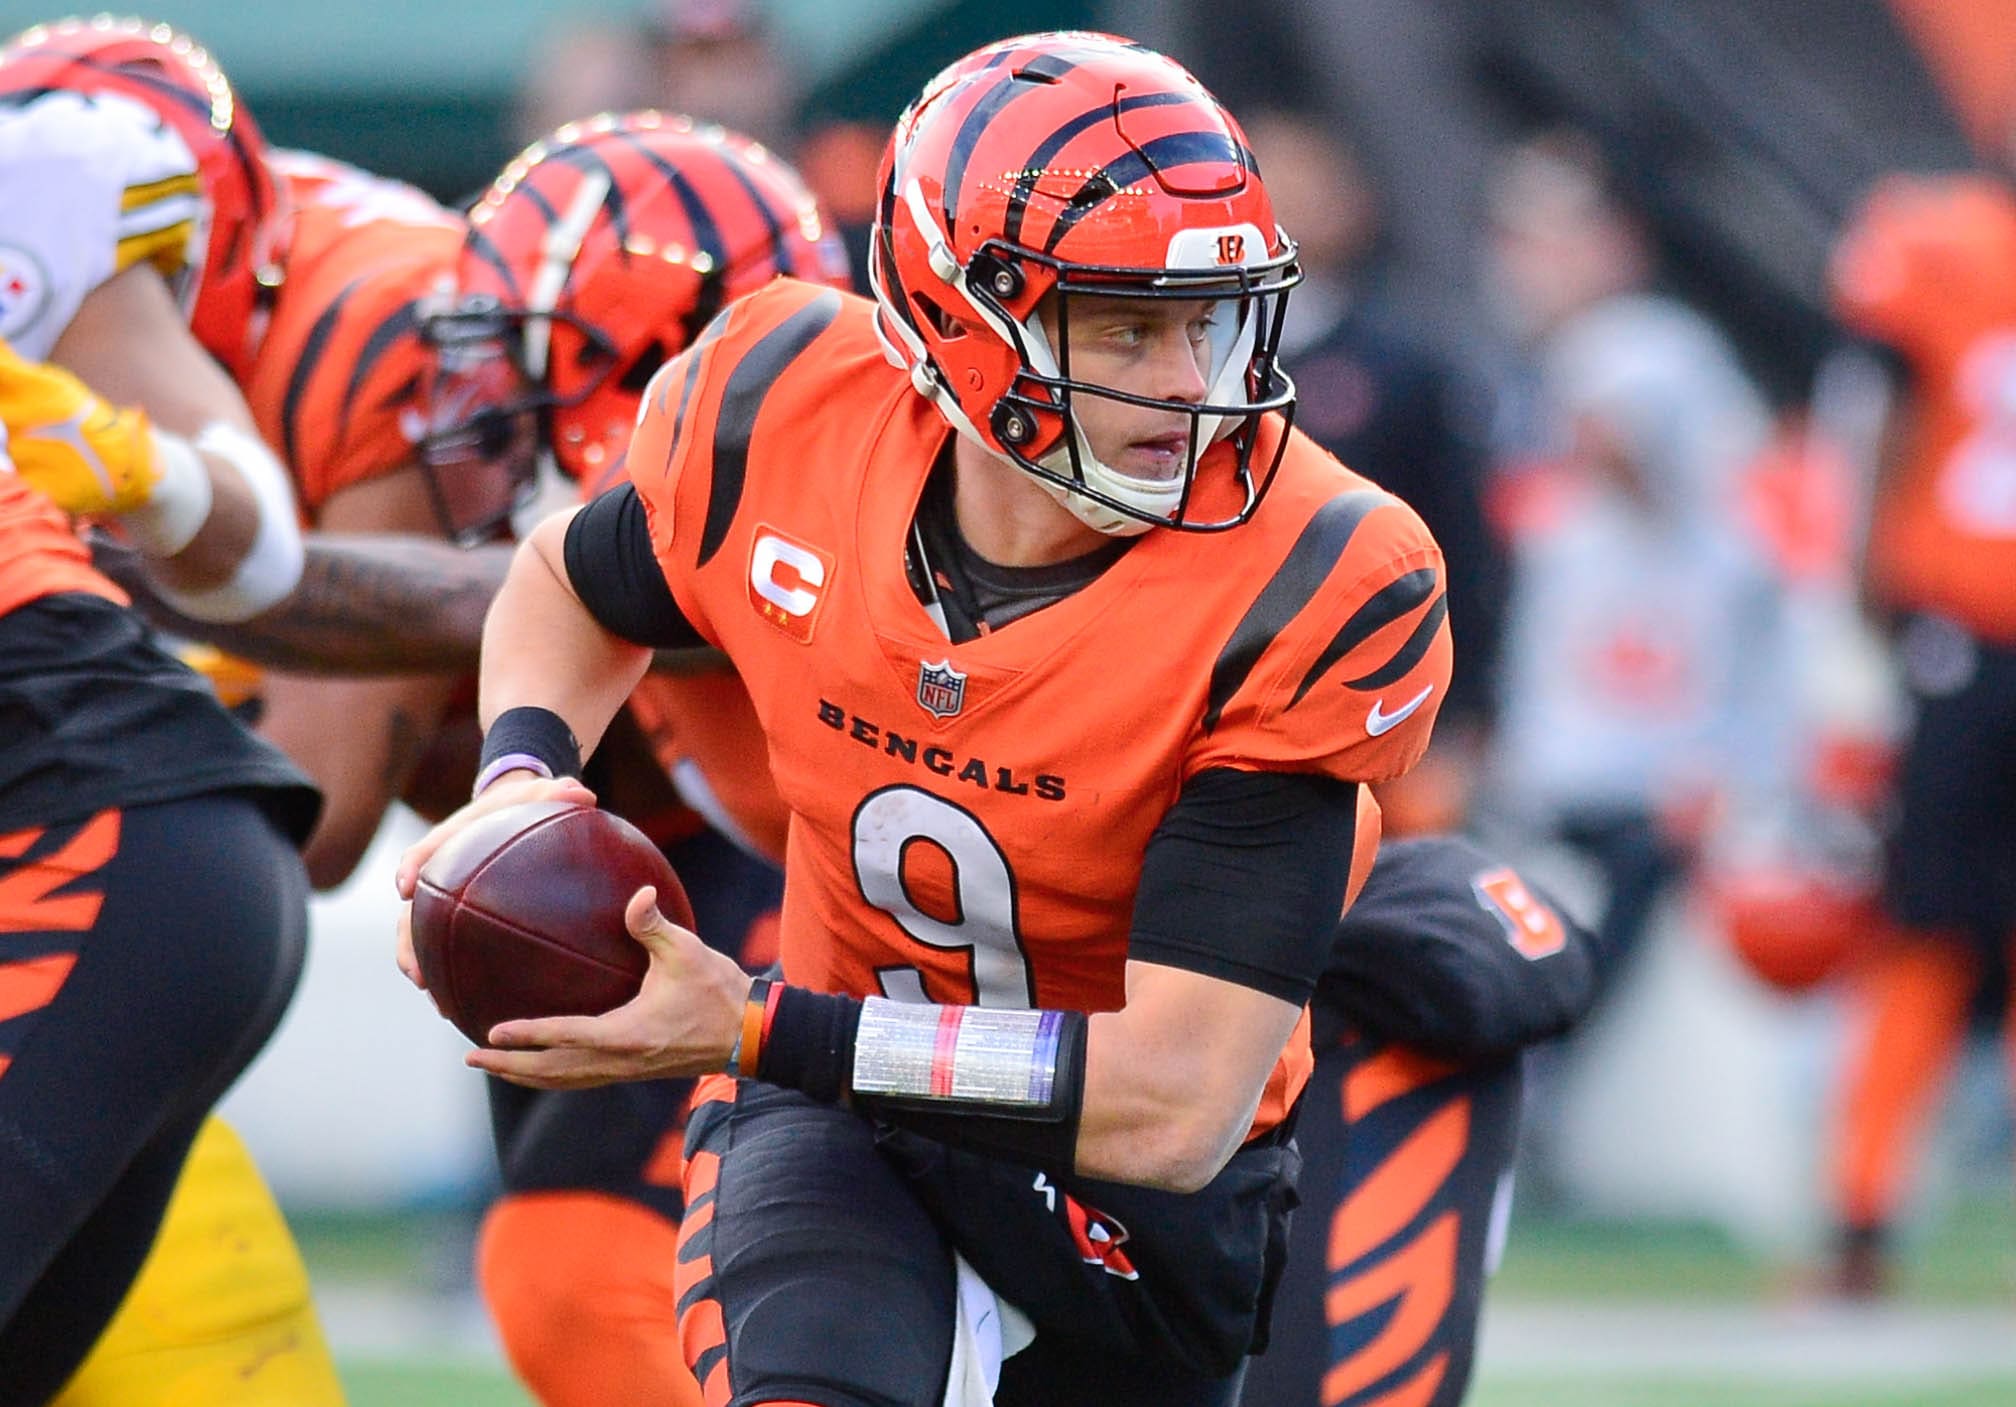 2022 NFL preview: Bengals dethroned Steelers as AFC North champs